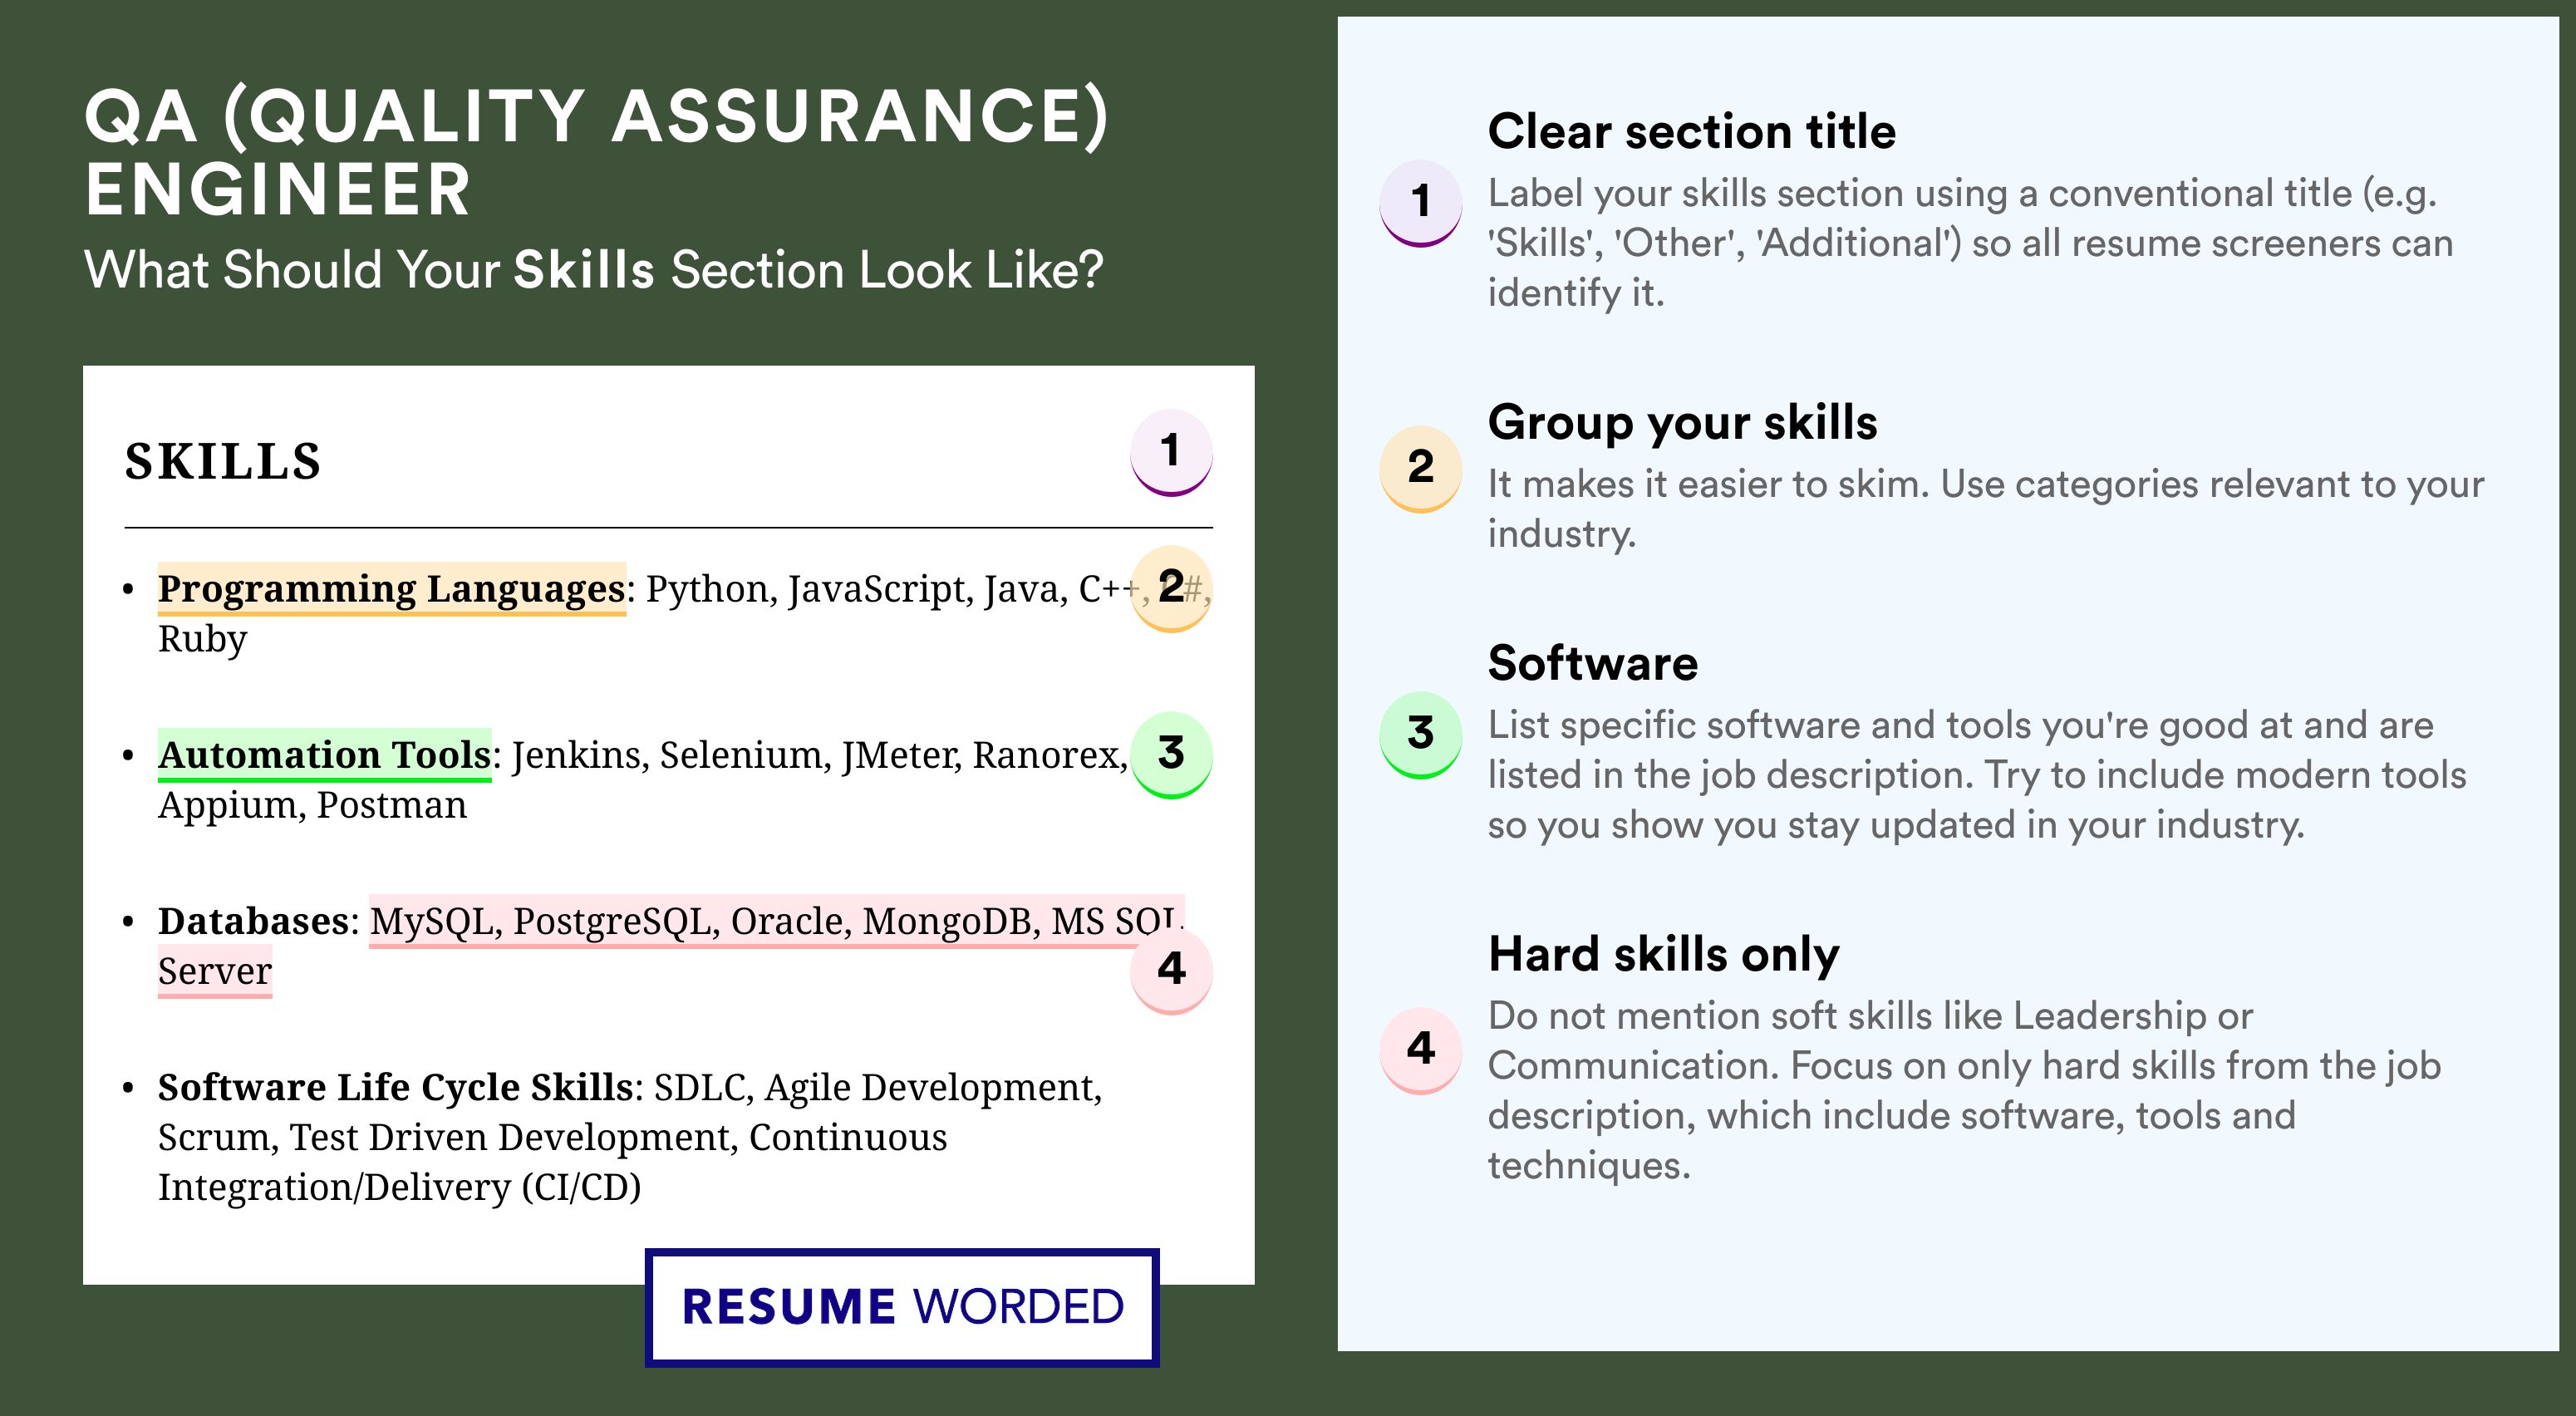 How To Write Your Skills Section - QA (Quality Assurance) Engineer Roles